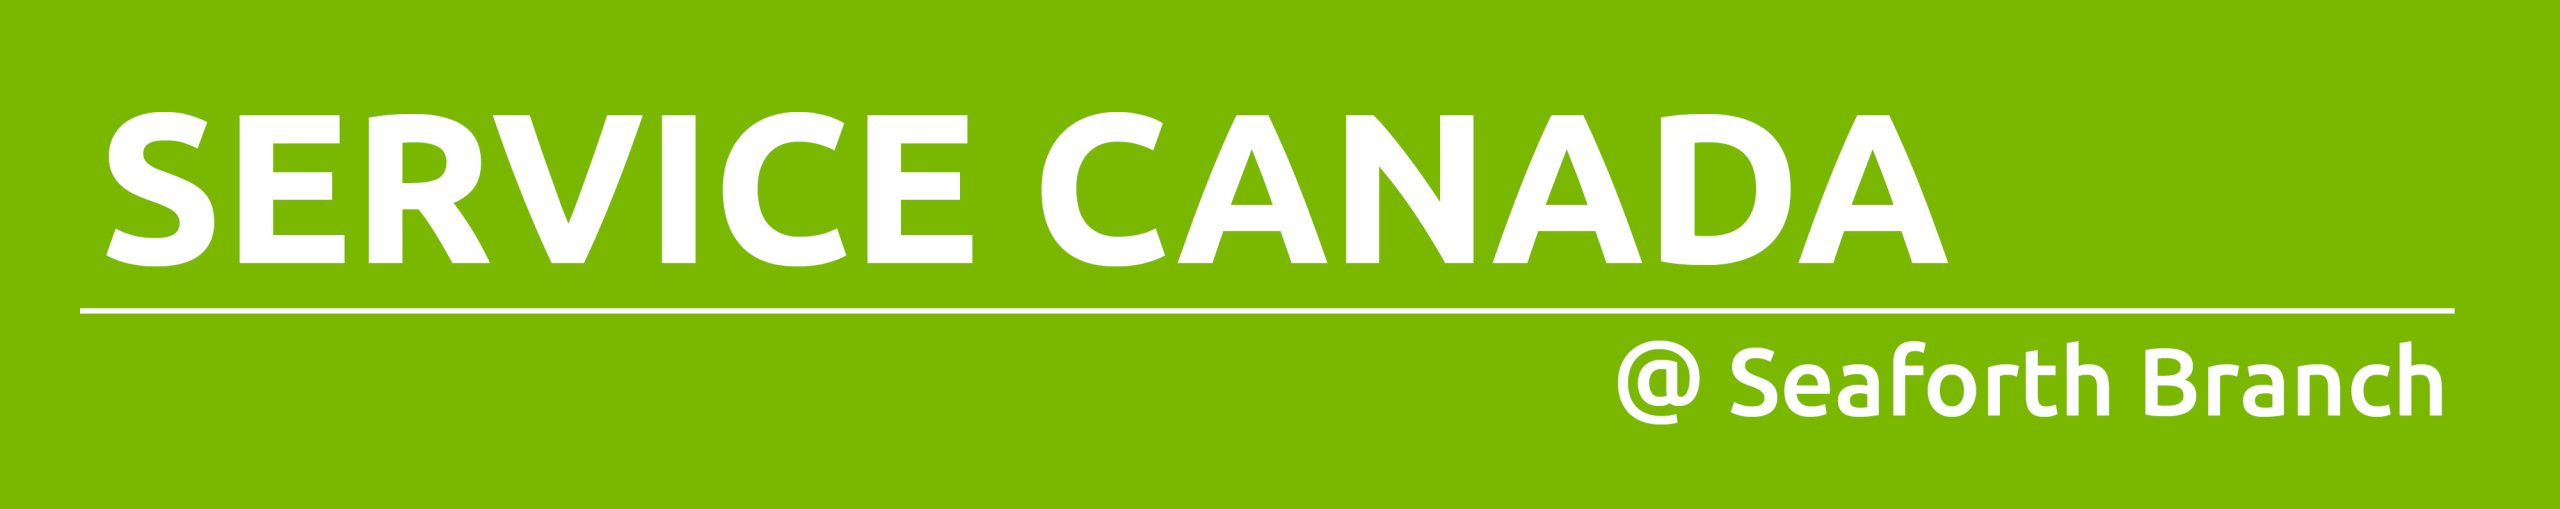 Green rectangle with text promoting Service Canada at Seaforth Branch